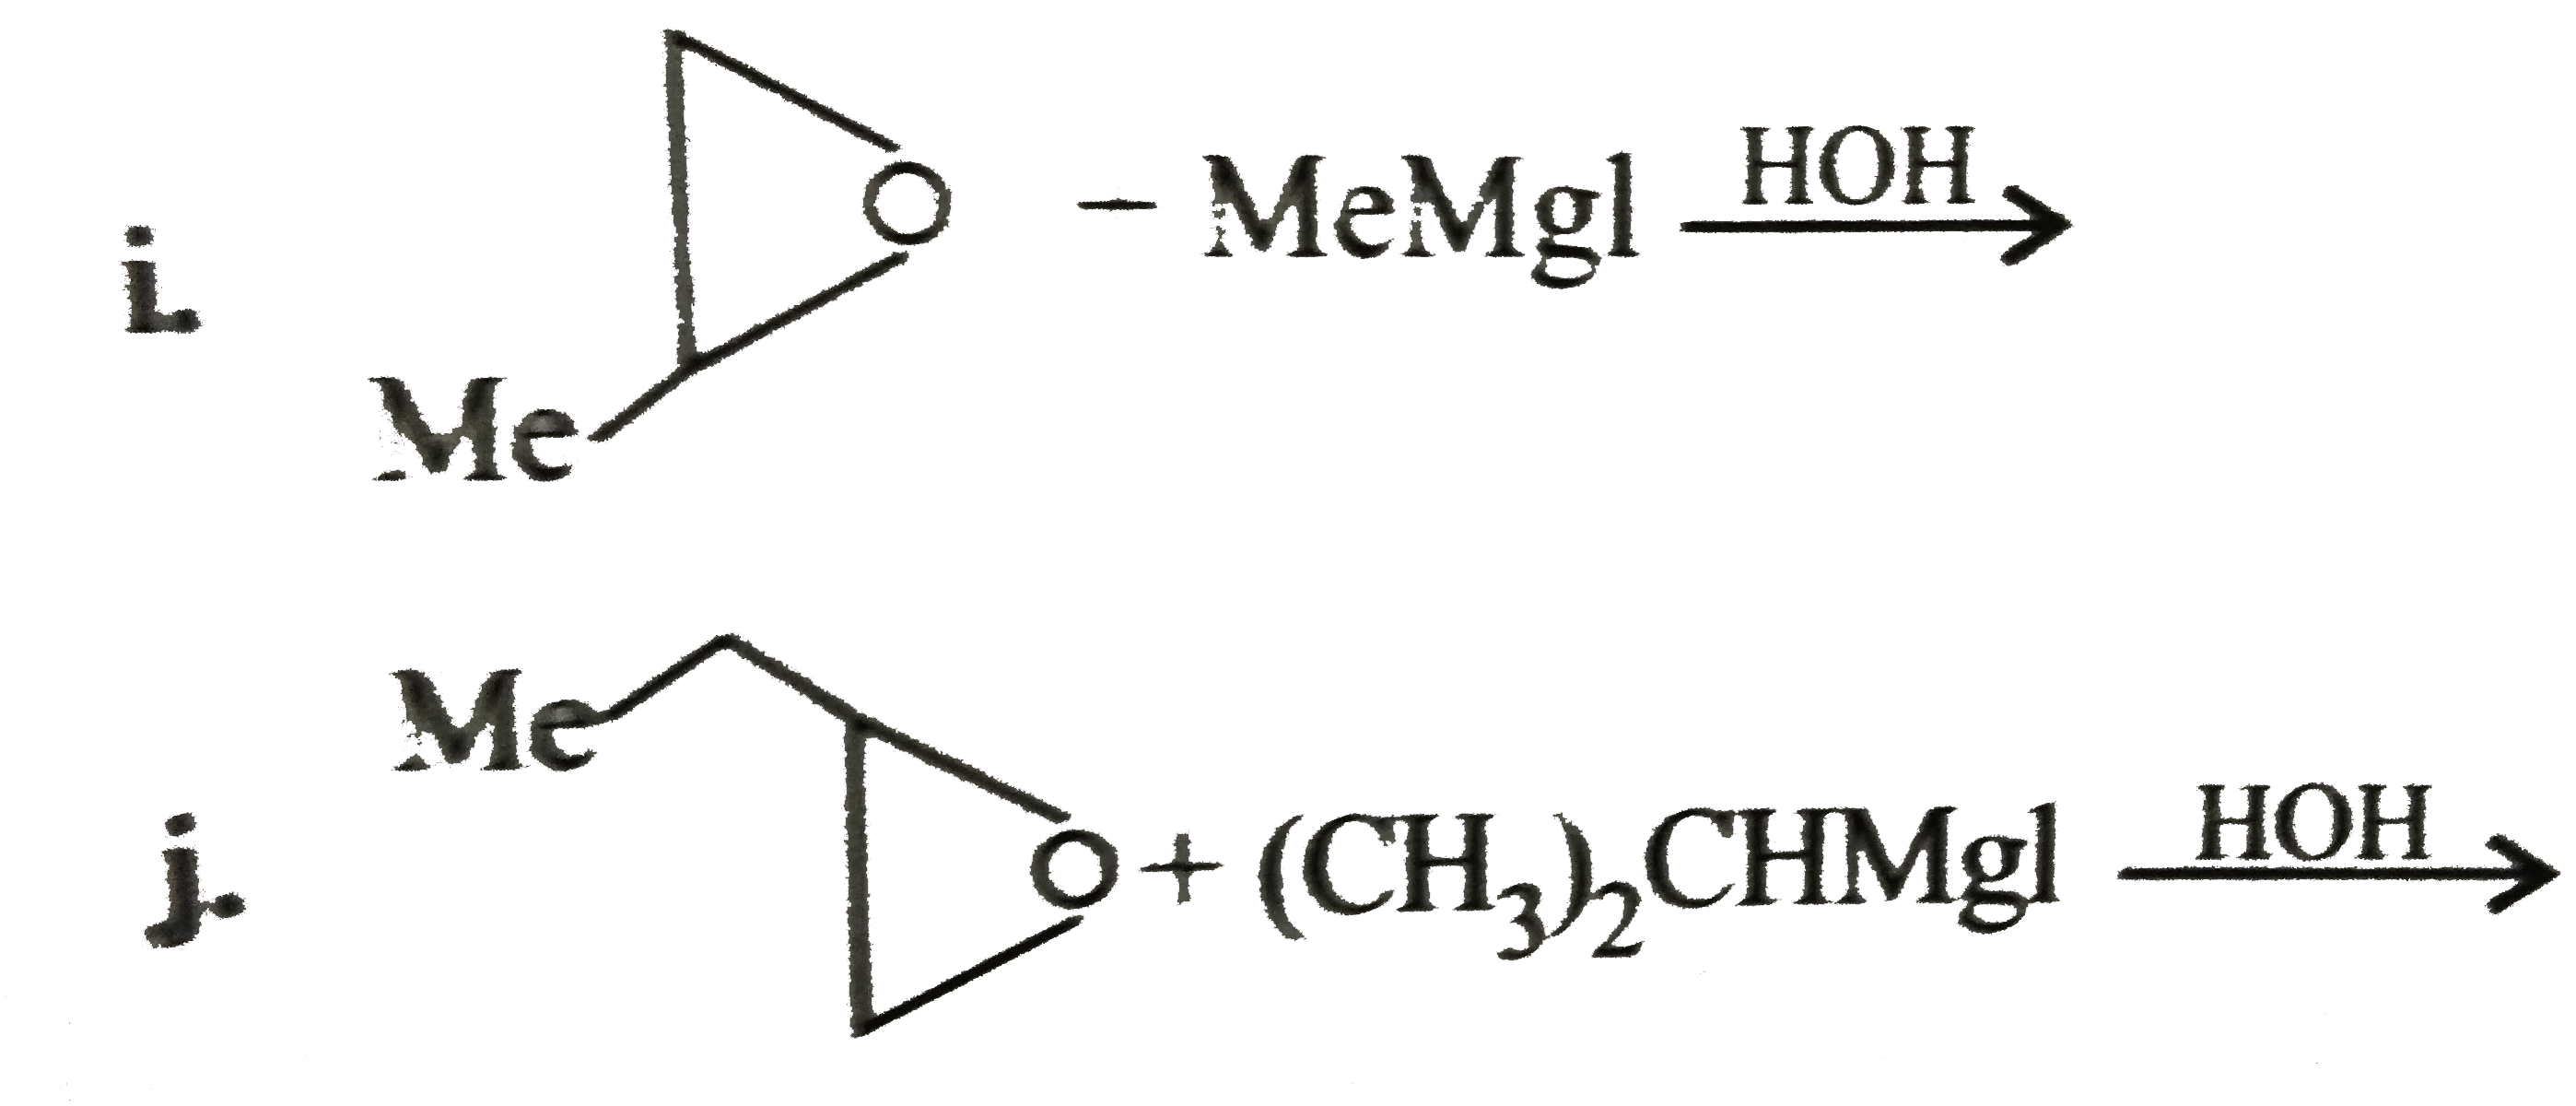 Synthesise the following : (a) Benzyl alcohol from G.R. (b) 2-Meth